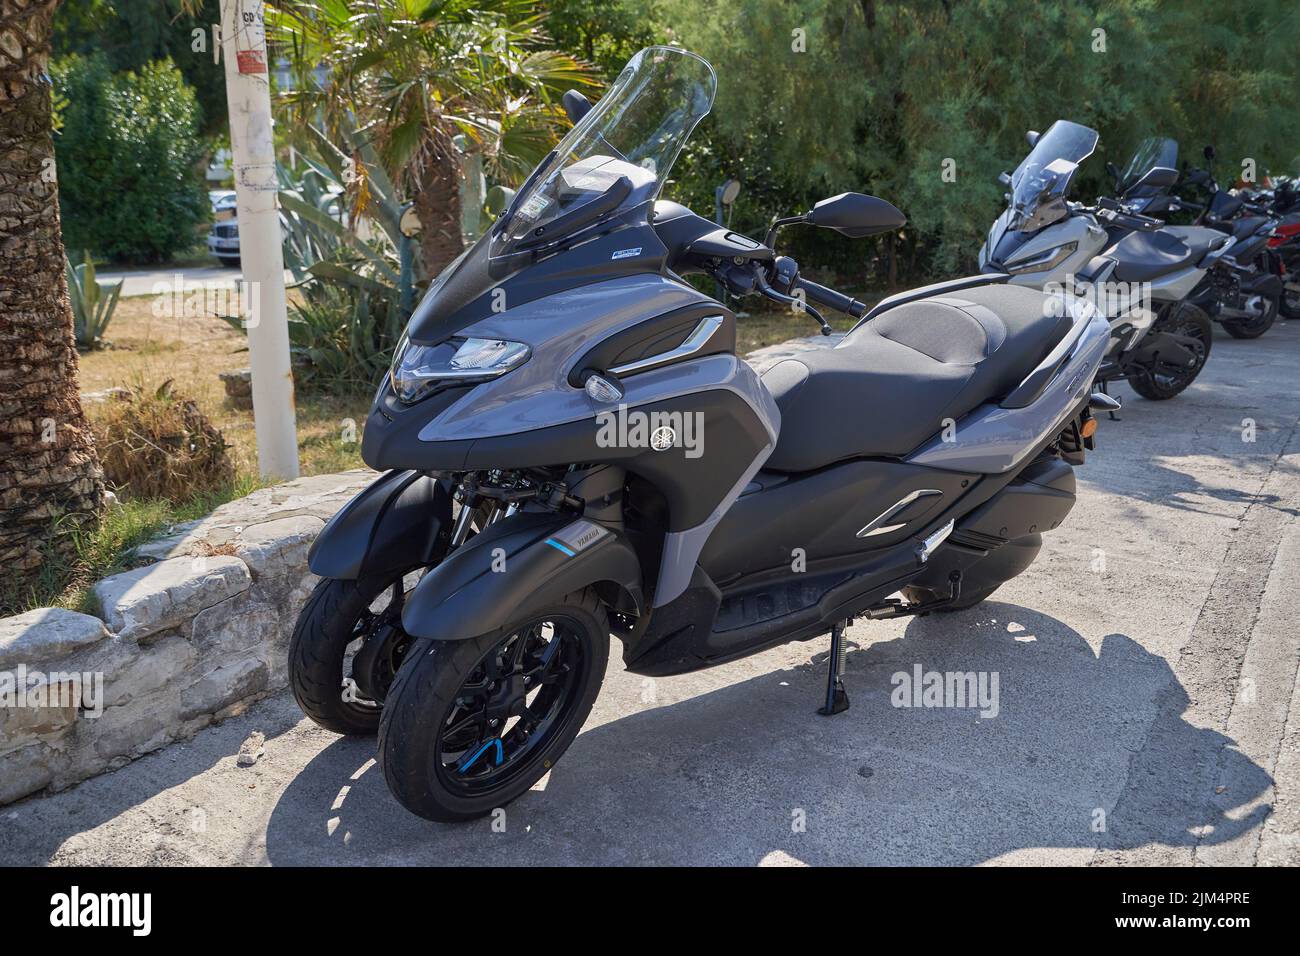 Parked motor scooter of Yamaha Tricity with three wheels Stock Photo